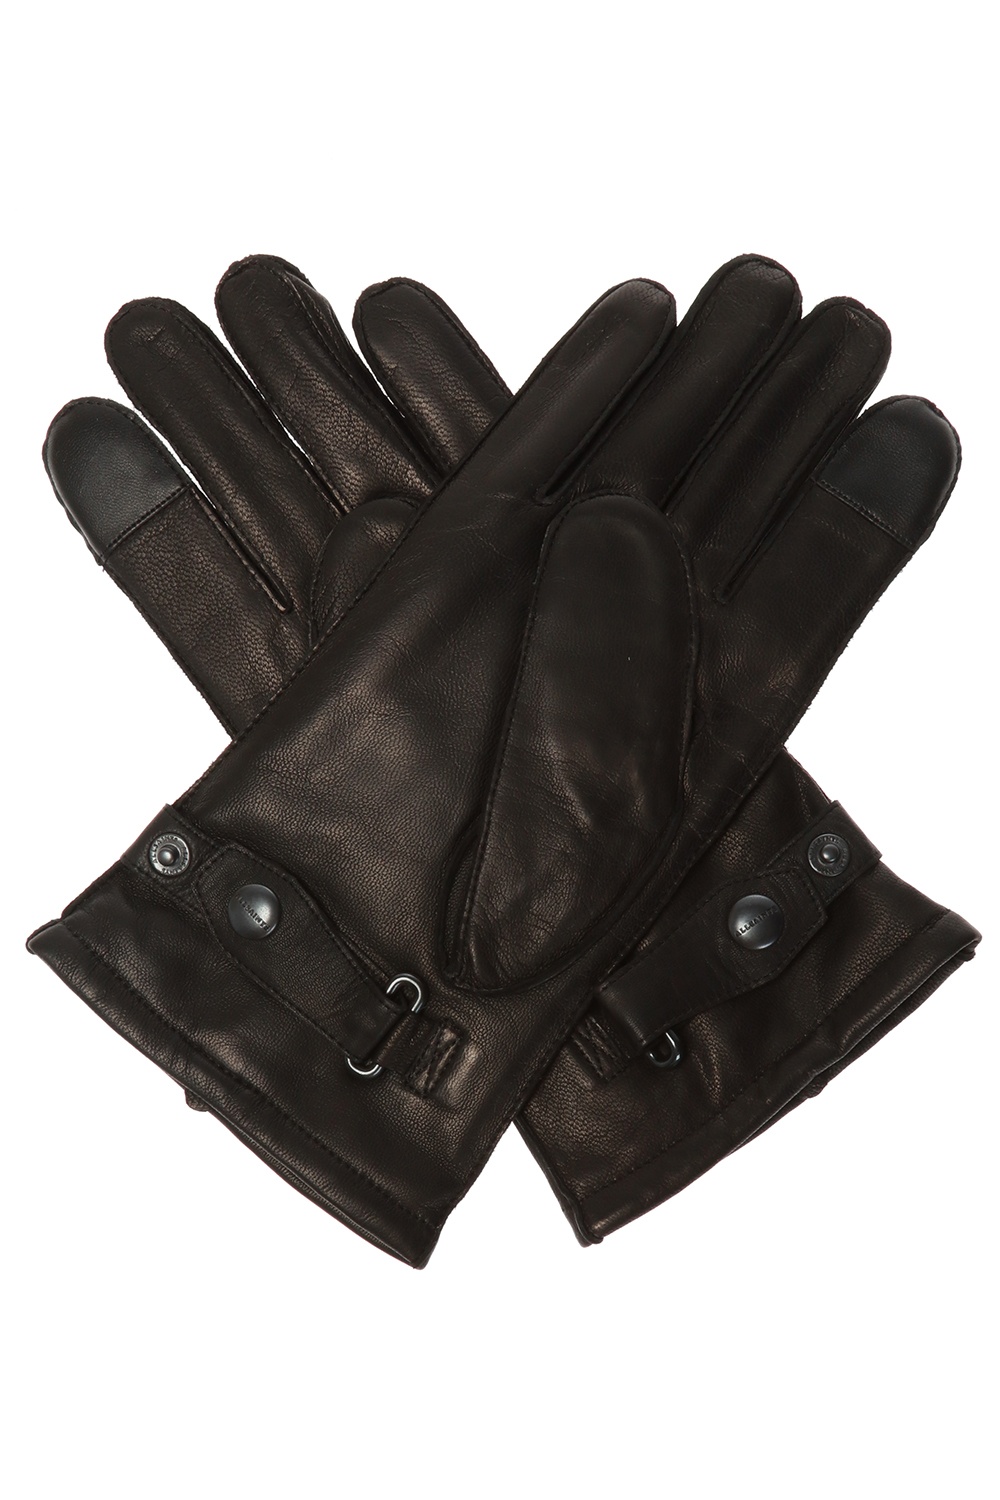 AllSaints ‘Yield’ leather gloves